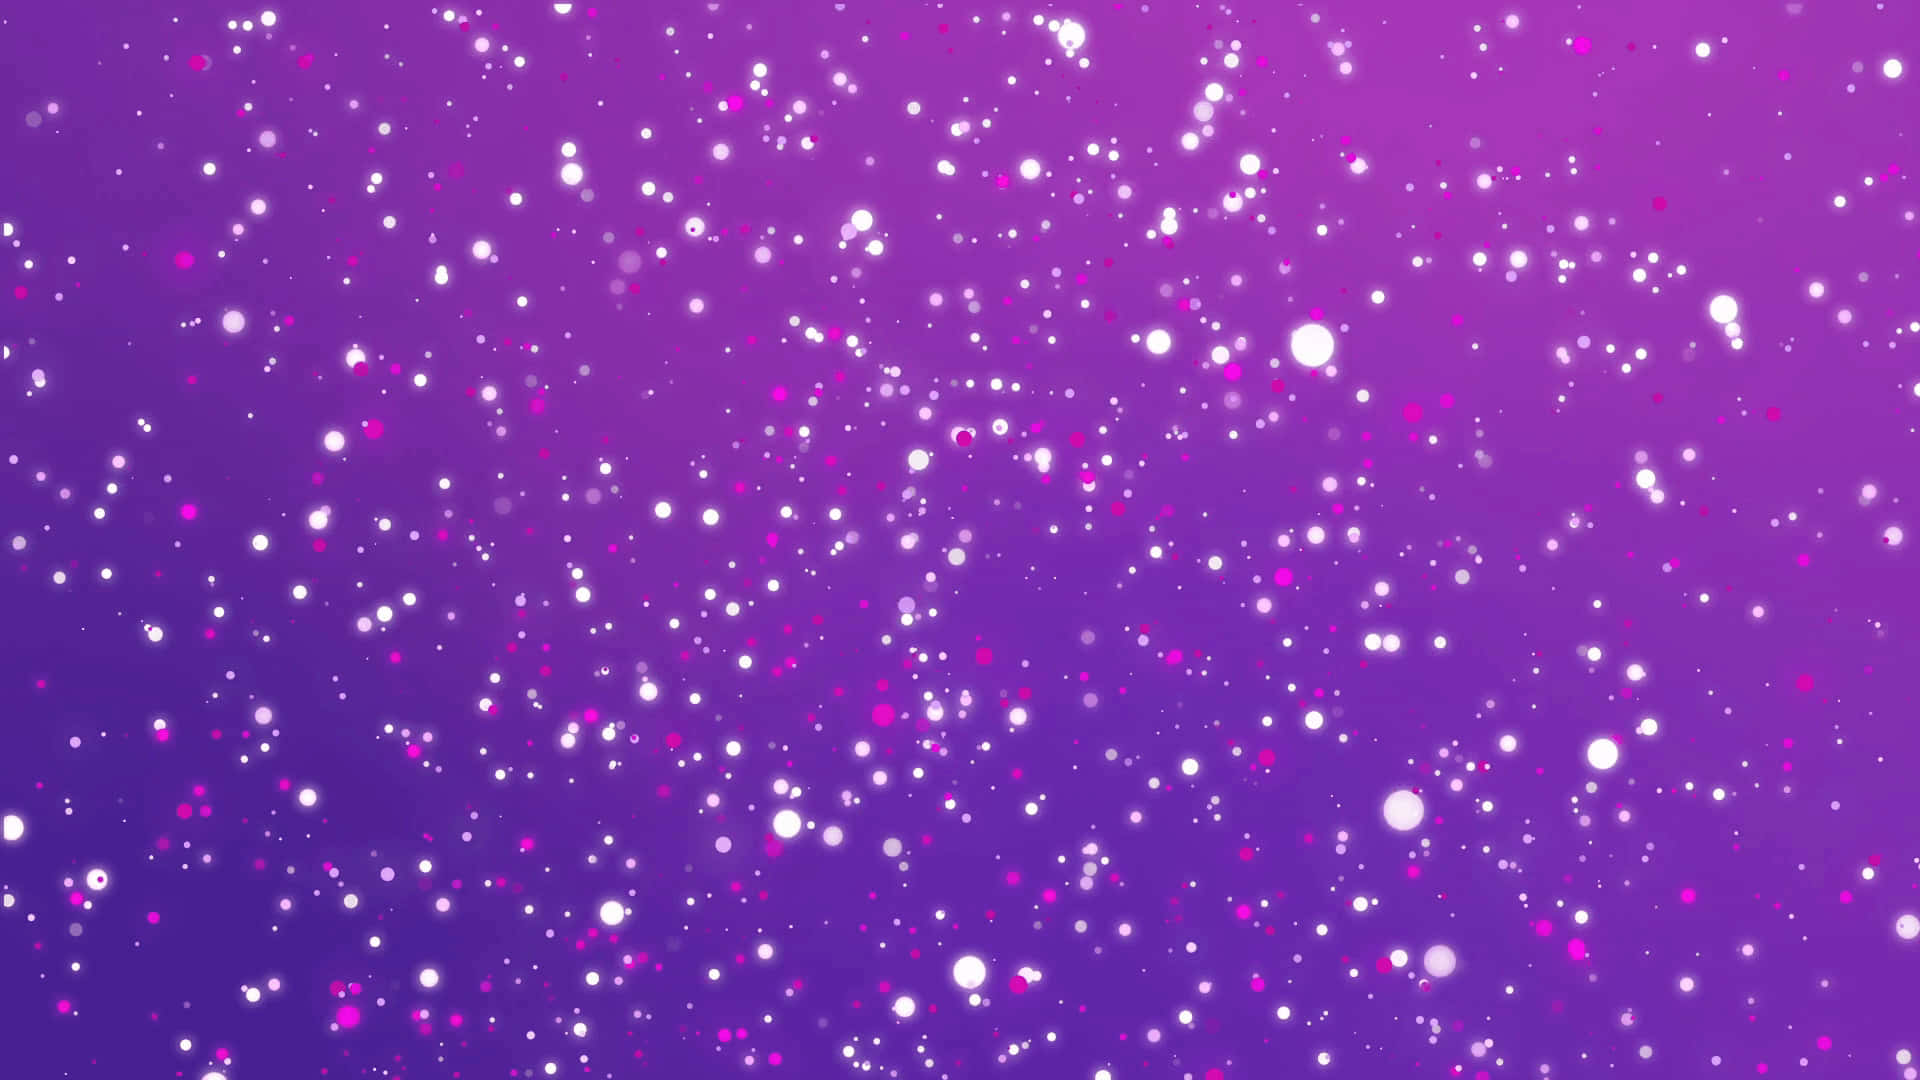 Vibrant Purple and Pink Colors Create a Beautiful Background